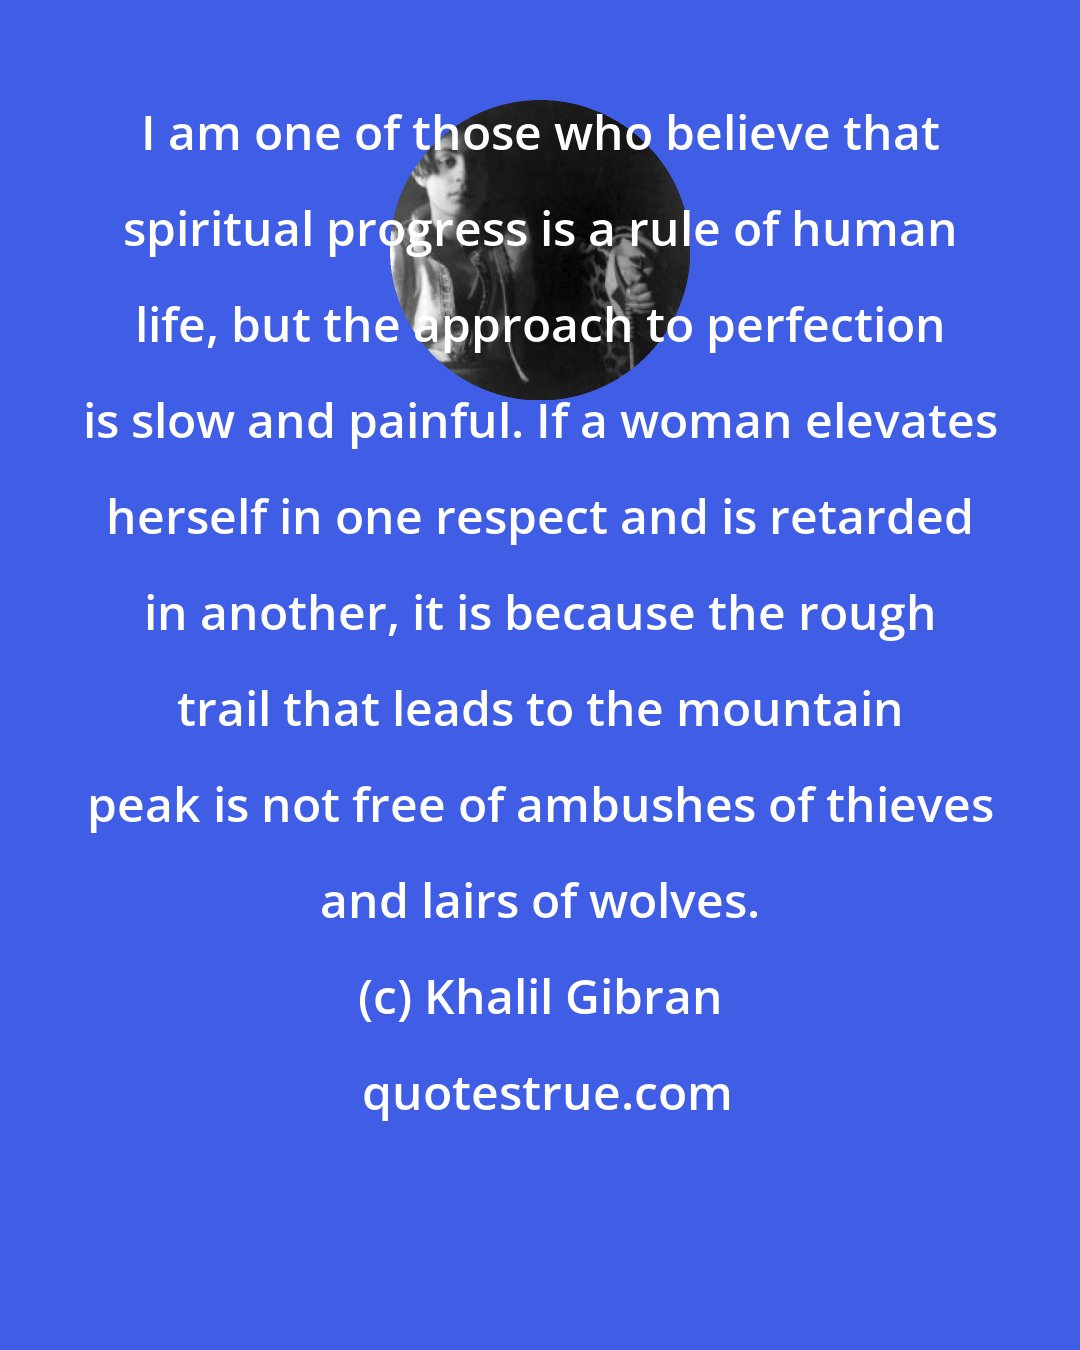 Khalil Gibran: I am one of those who believe that spiritual progress is a rule of human life, but the approach to perfection is slow and painful. If a woman elevates herself in one respect and is retarded in another, it is because the rough trail that leads to the mountain peak is not free of ambushes of thieves and lairs of wolves.